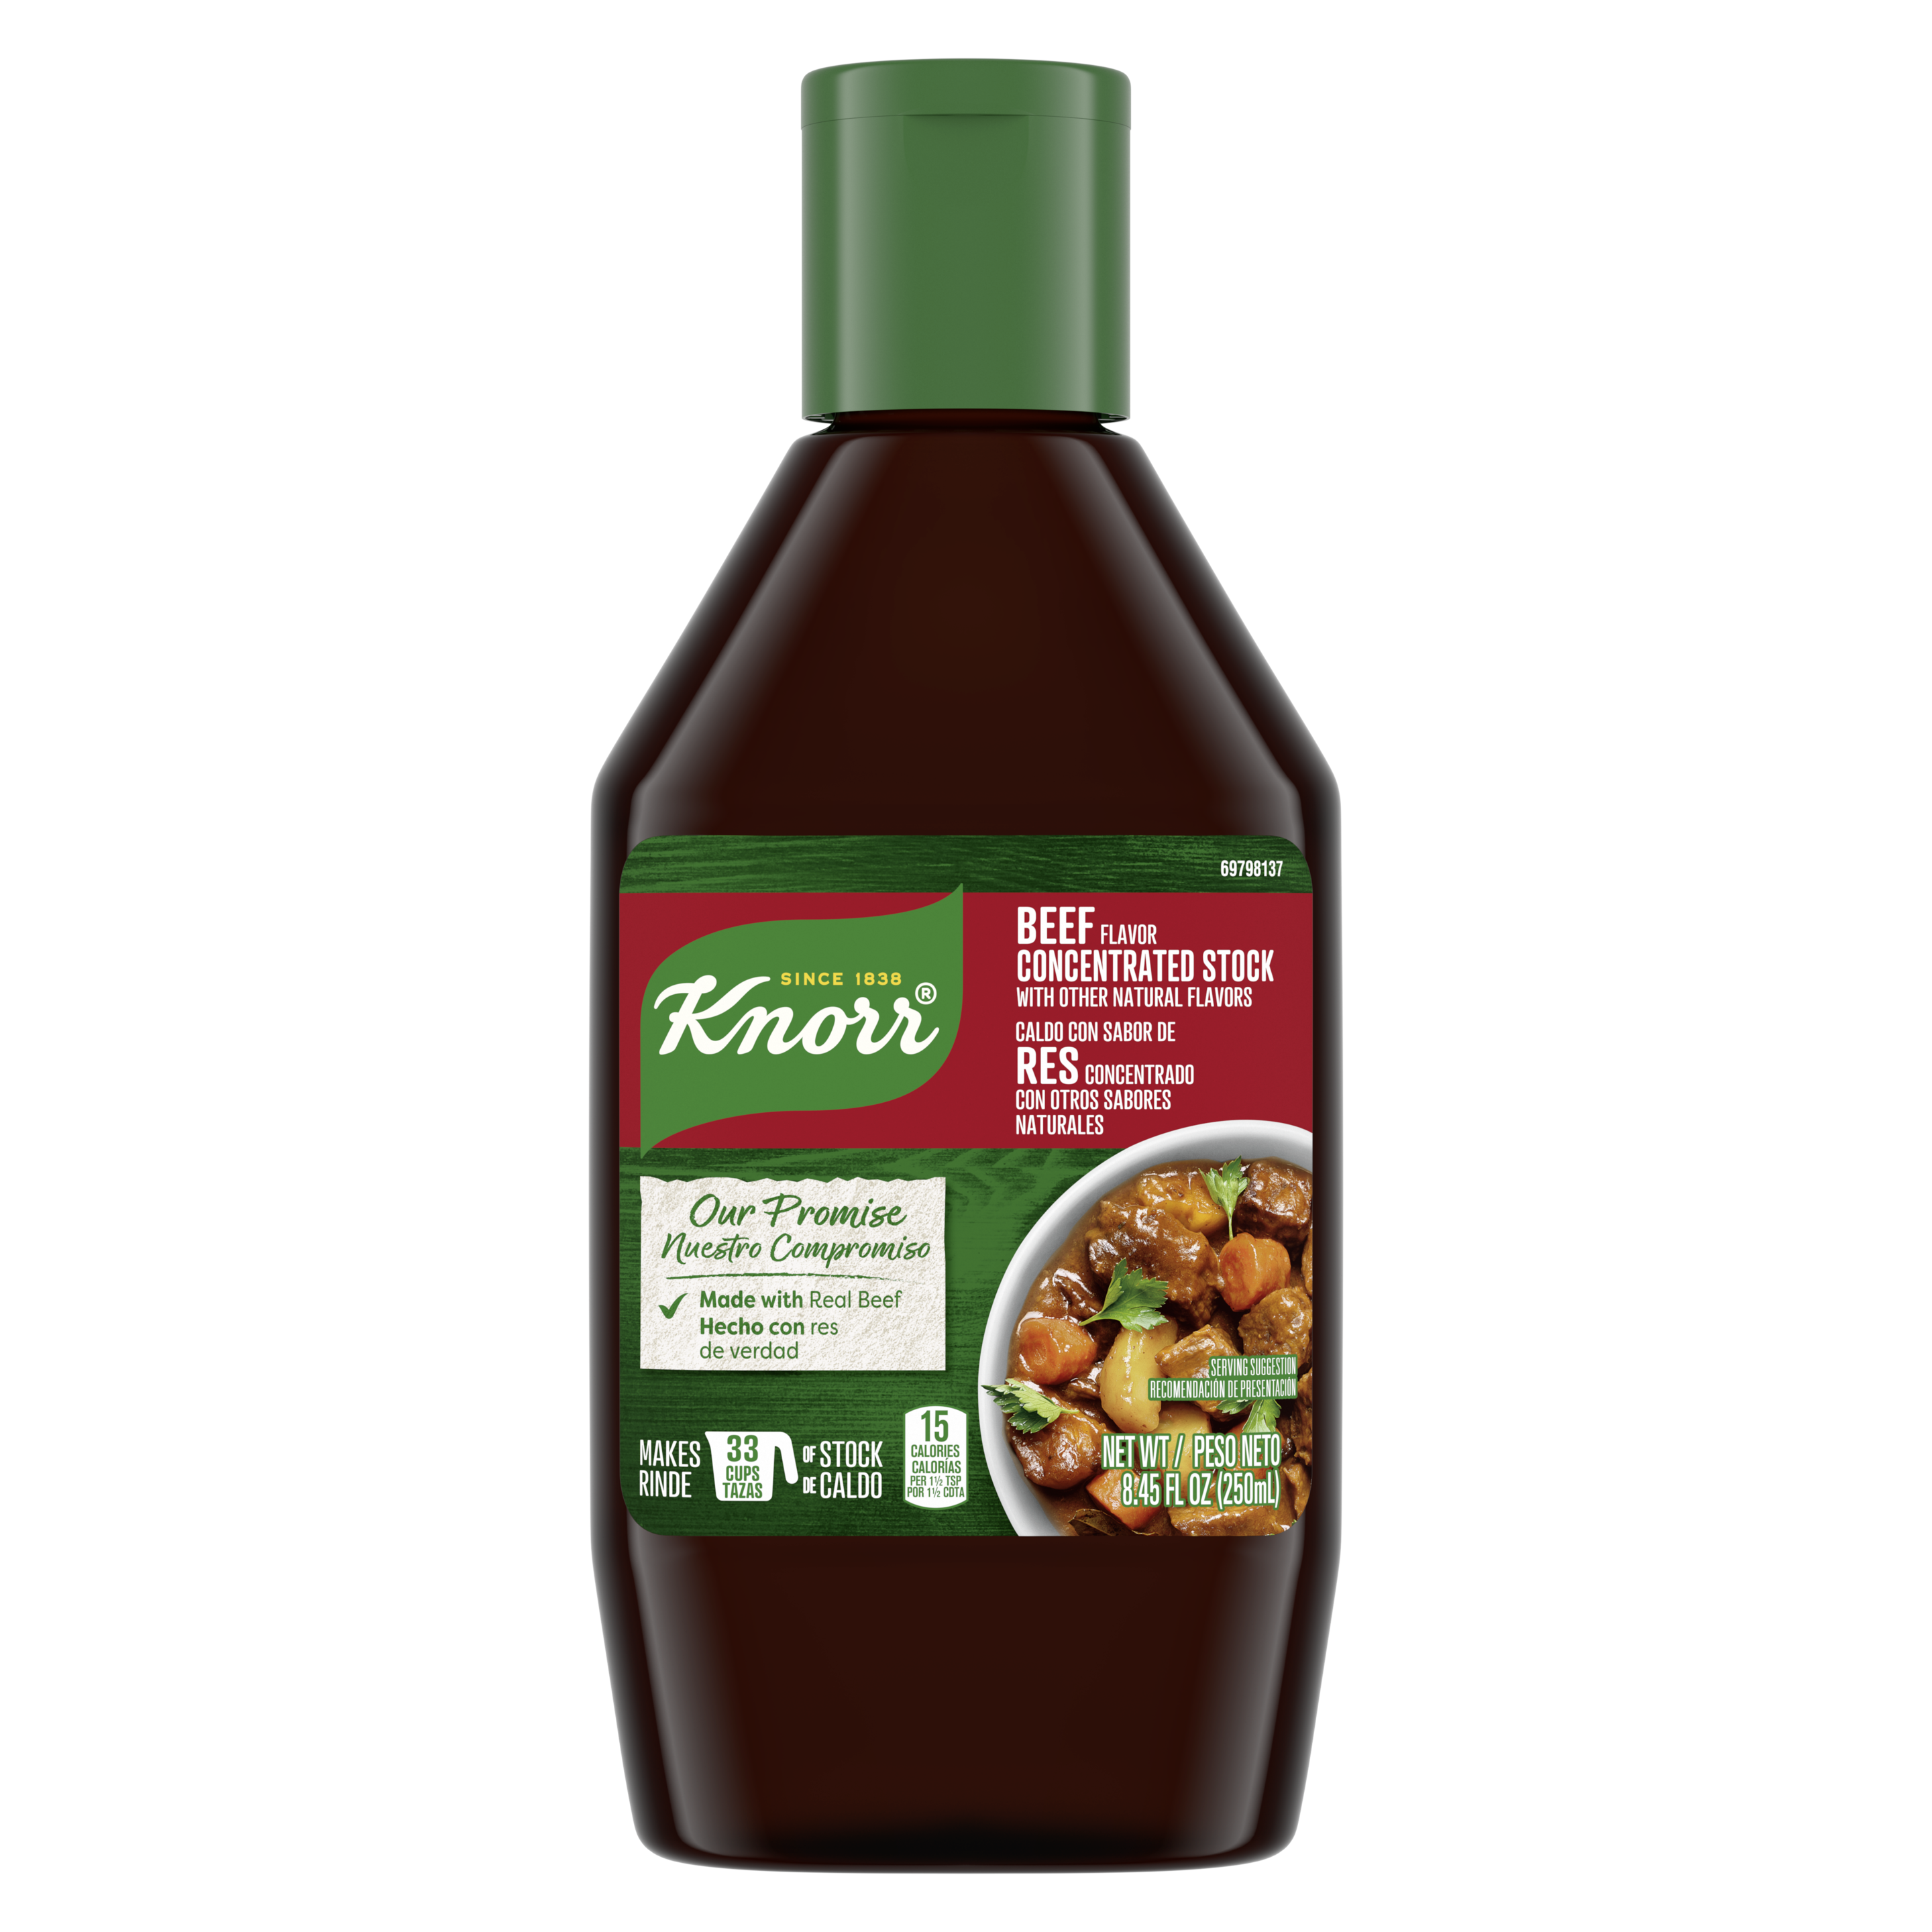 Knorr Beef Concentrated Stock